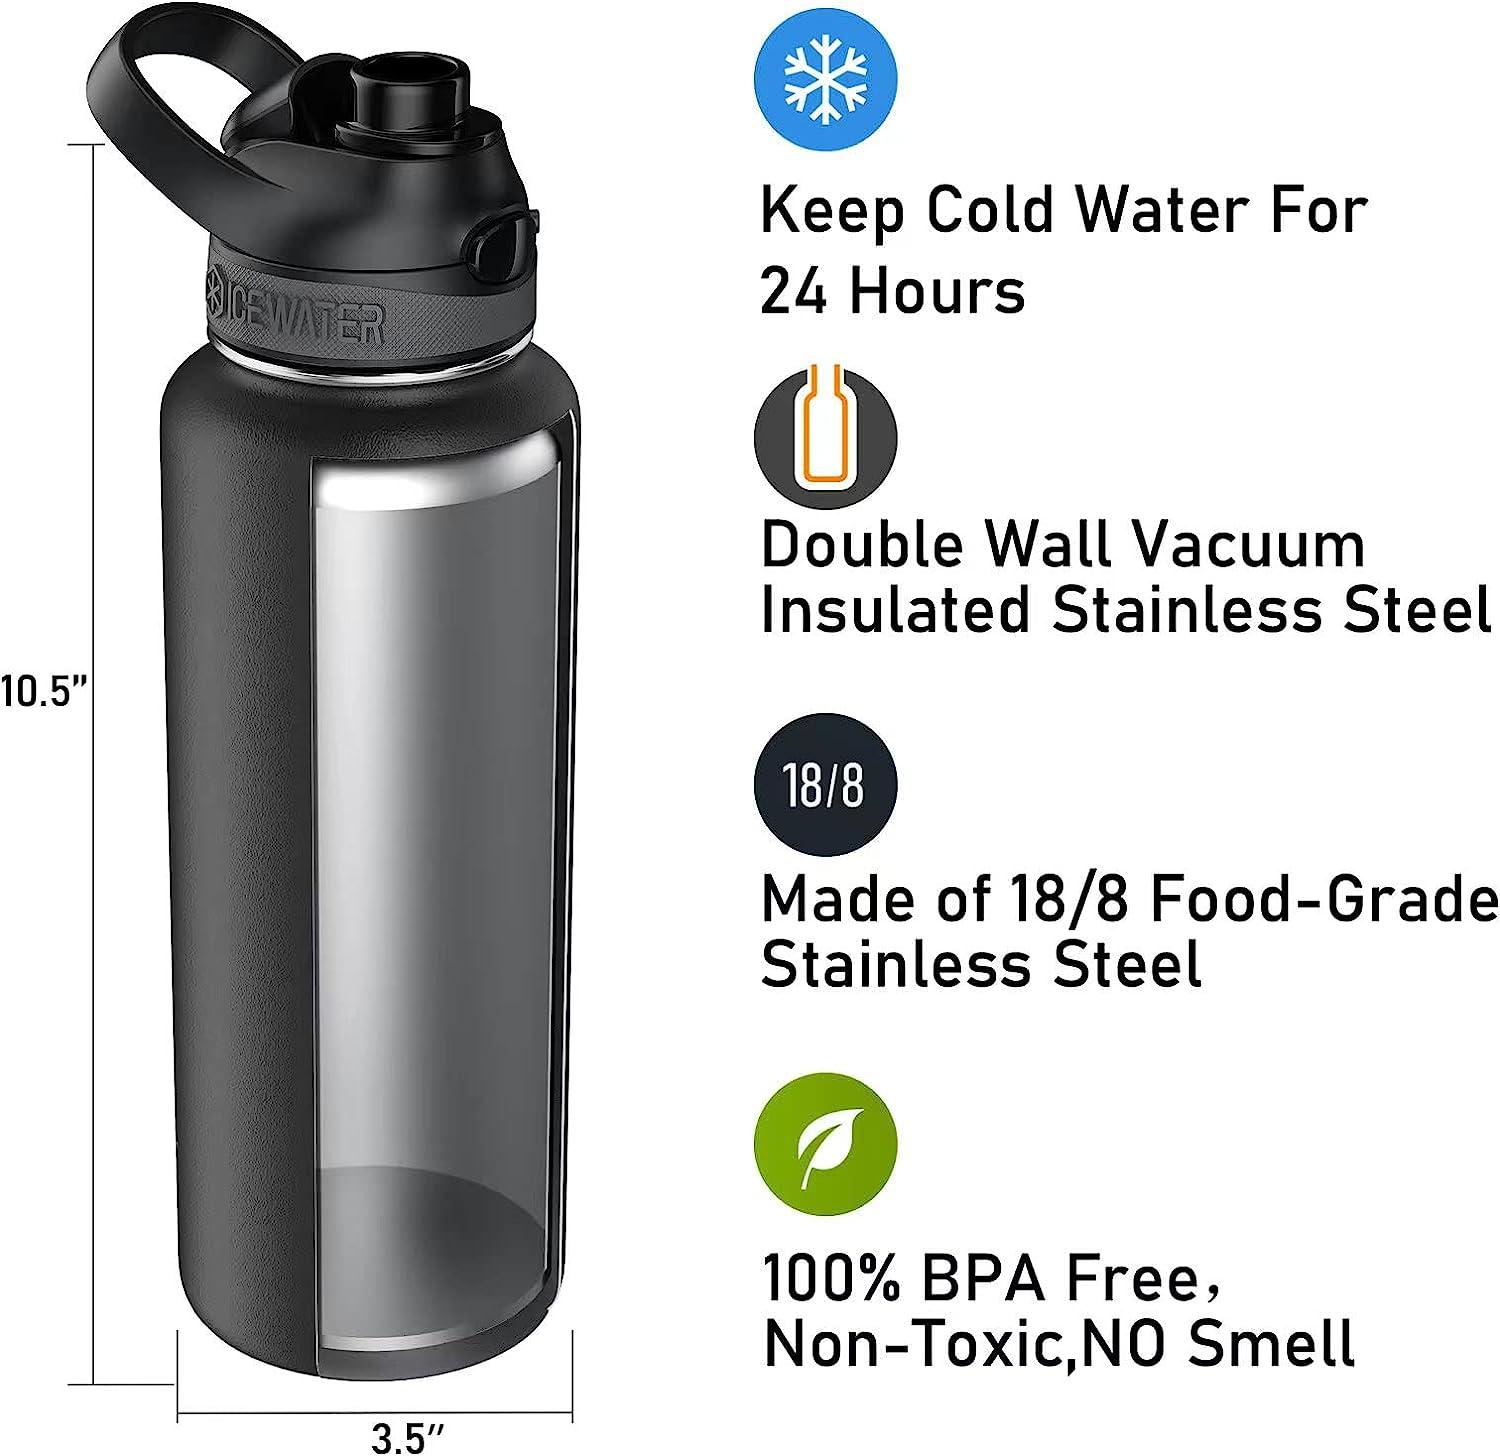 Aoibox 40 oz. Iced Breeze Stainless Steel Insulated Water Bottle (Set of 1)